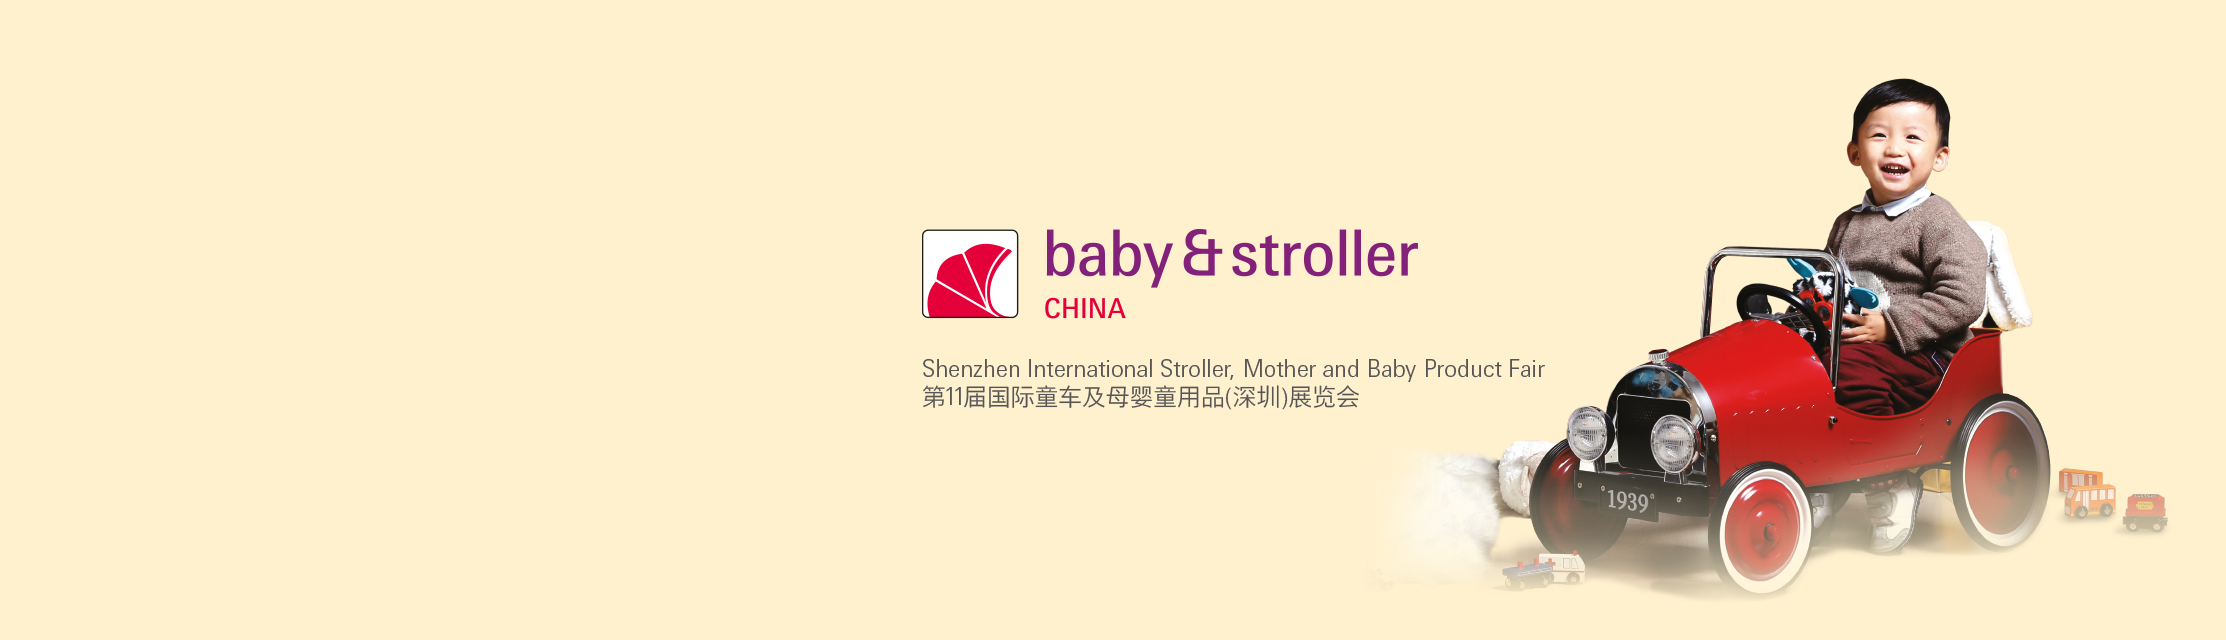 Guangzhou International Stroller and Baby Product Fair